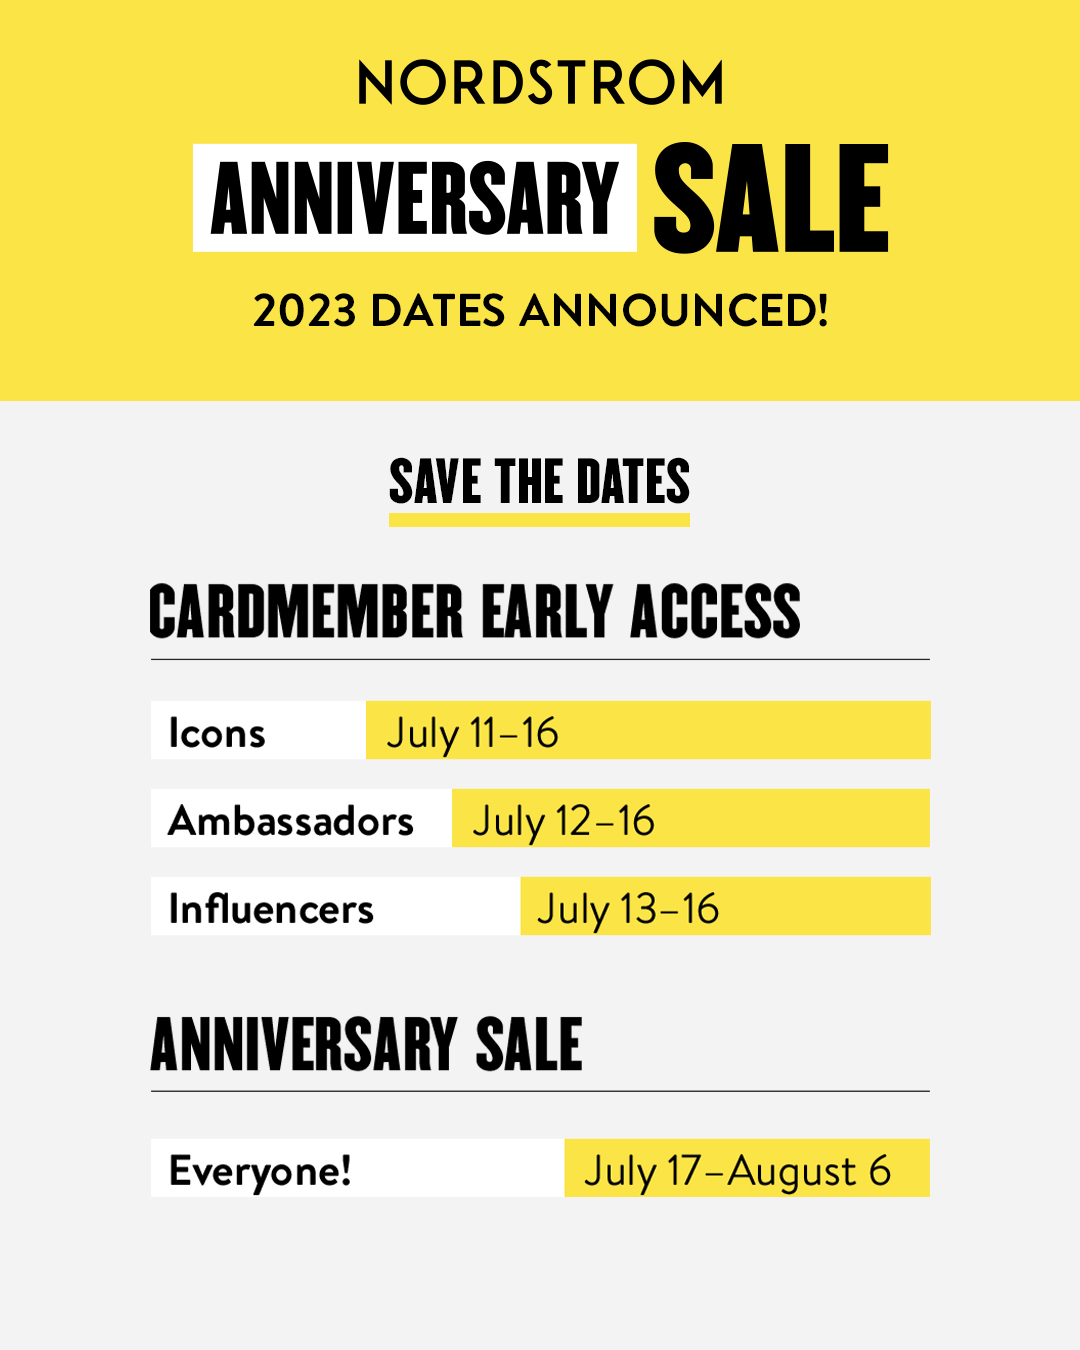 Nordstrom Anniversary Sale 2023 Guide Dates